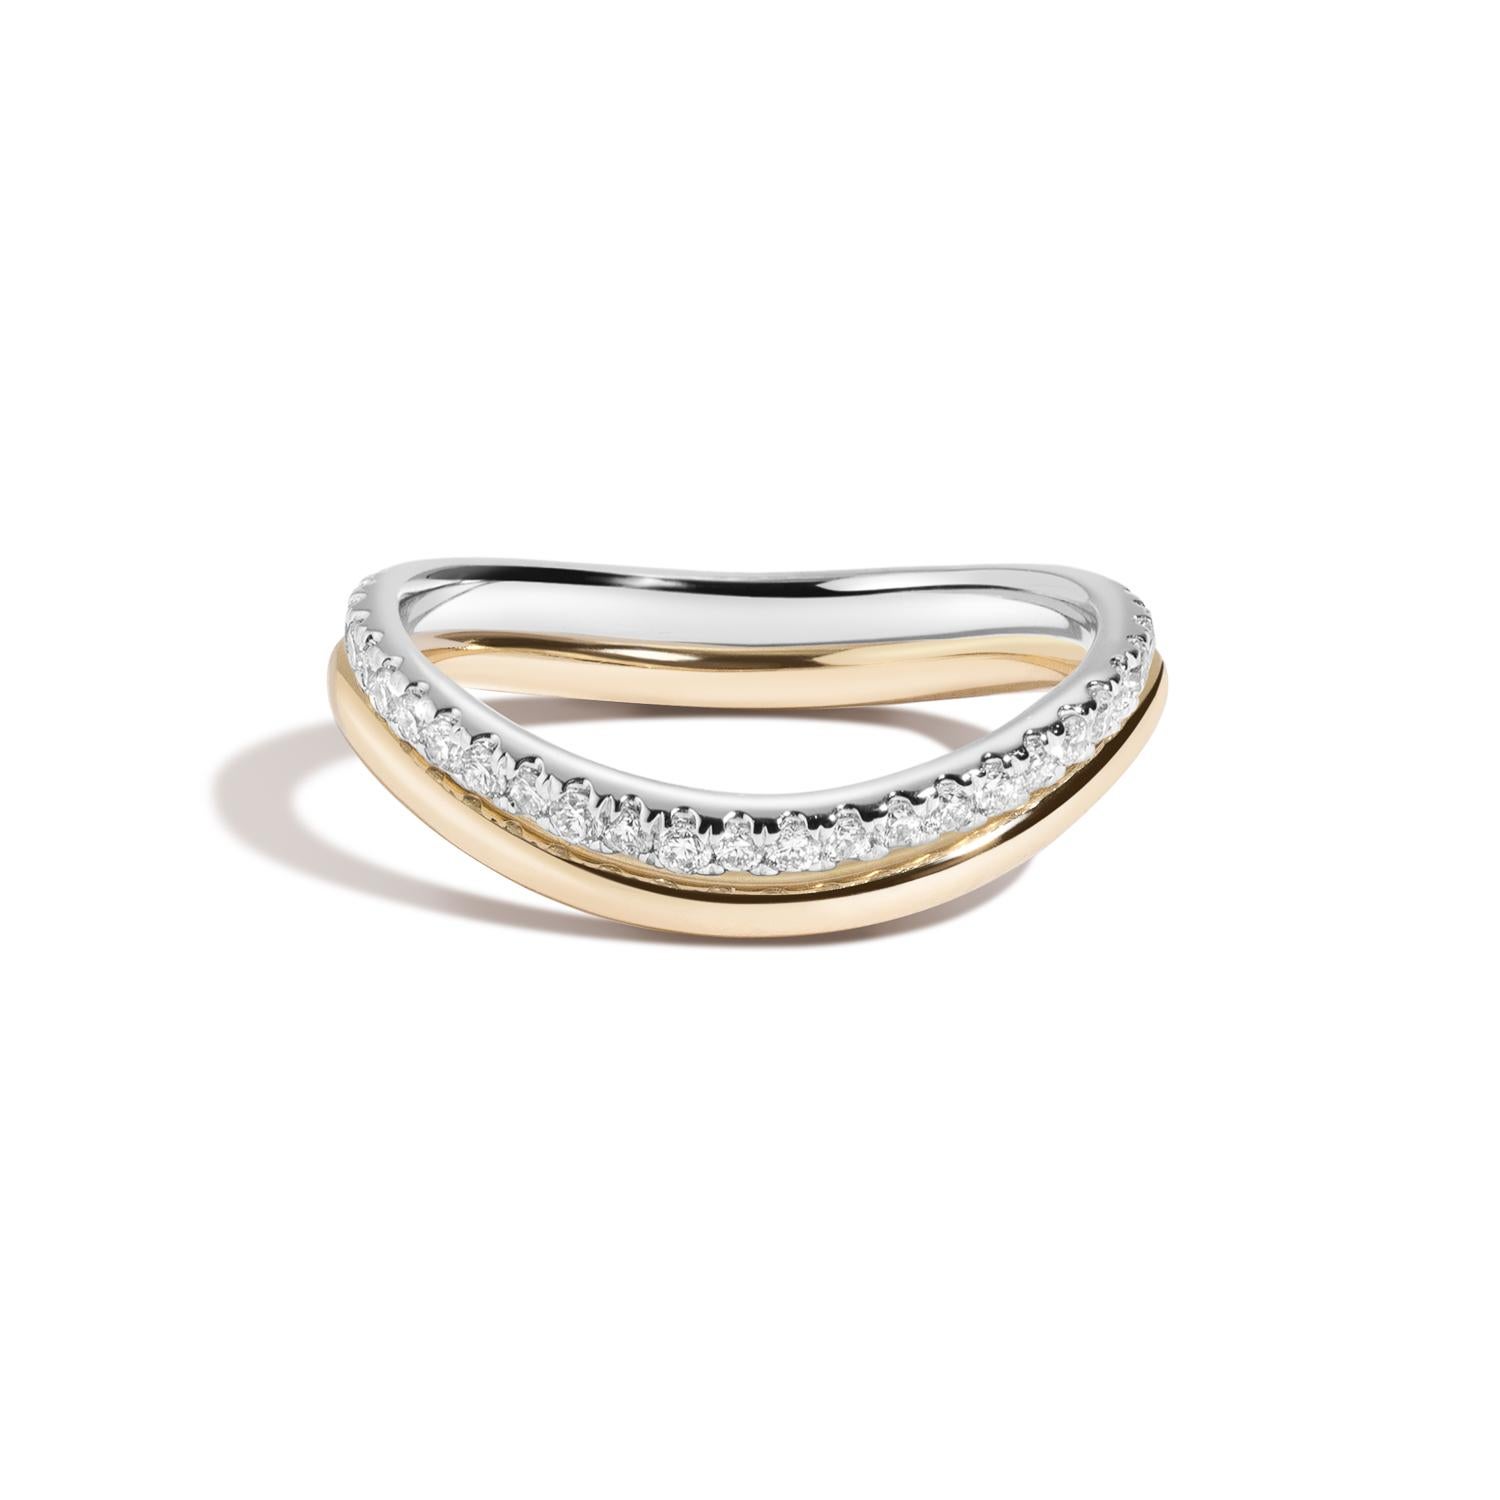 Consisting of an elegant undulating wave, our Bossa Nova Diamond Band looks lovely on its own or stacked with other rings from our Bossa Nova series. 

- 1.8mm width
- Total carat weight: 0.4c (for size 6)
- Diamonds are F-color / VS-clarity
-